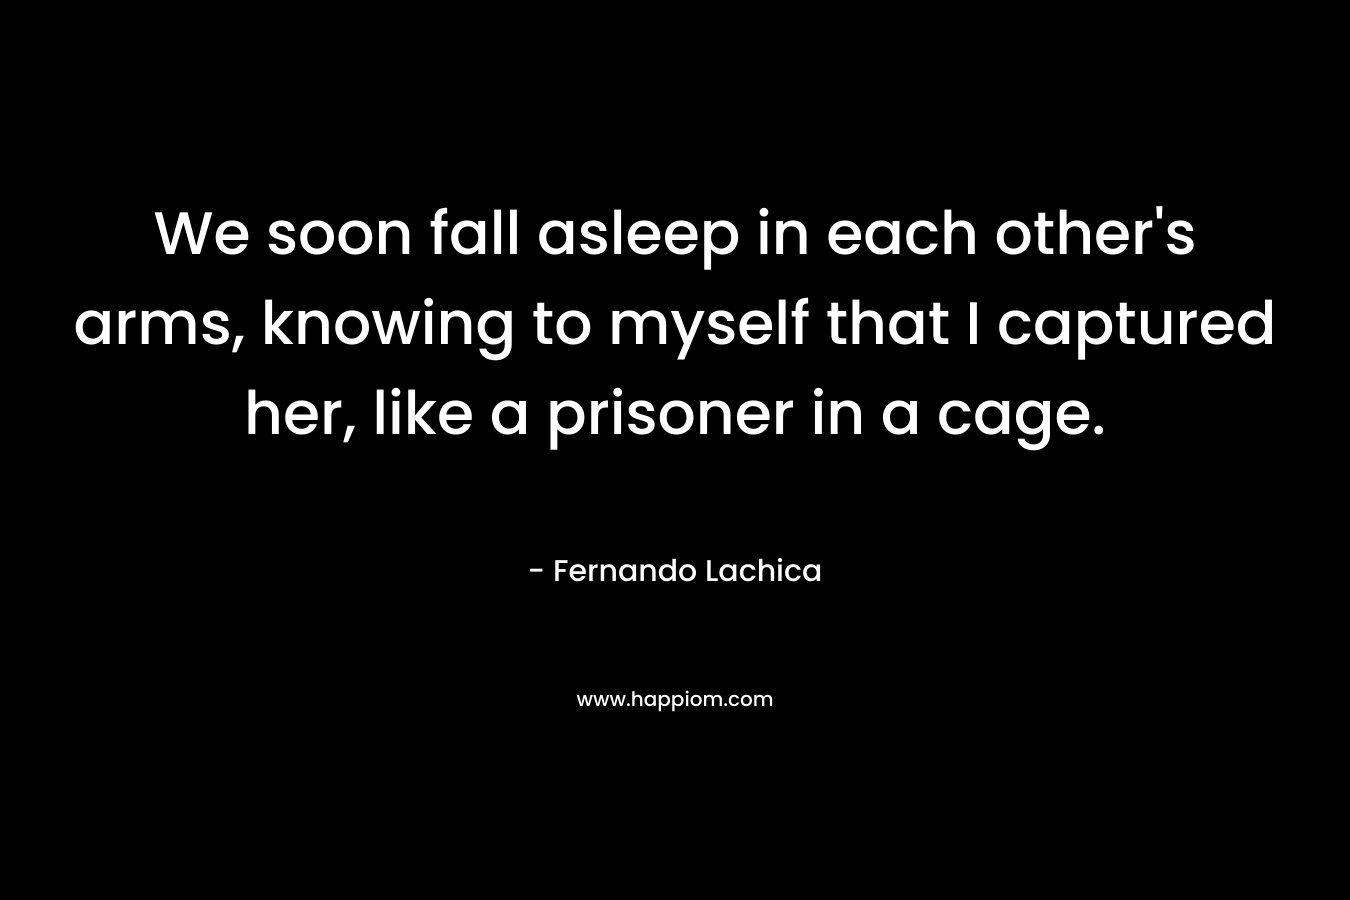 We soon fall asleep in each other's arms, knowing to myself that I captured her, like a prisoner in a cage.